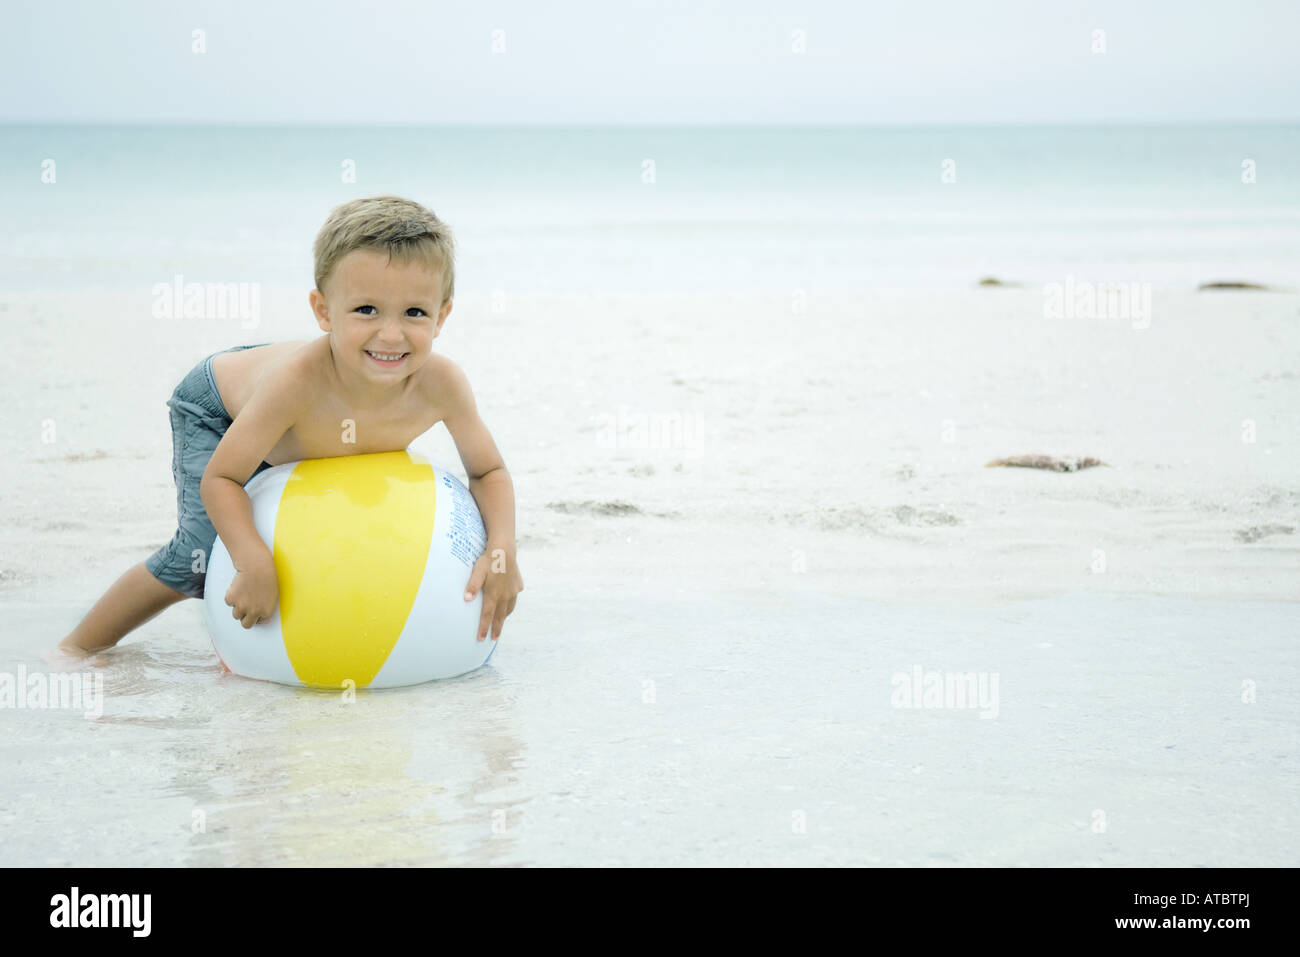 A seven year old boy playing on the beach in the sand 